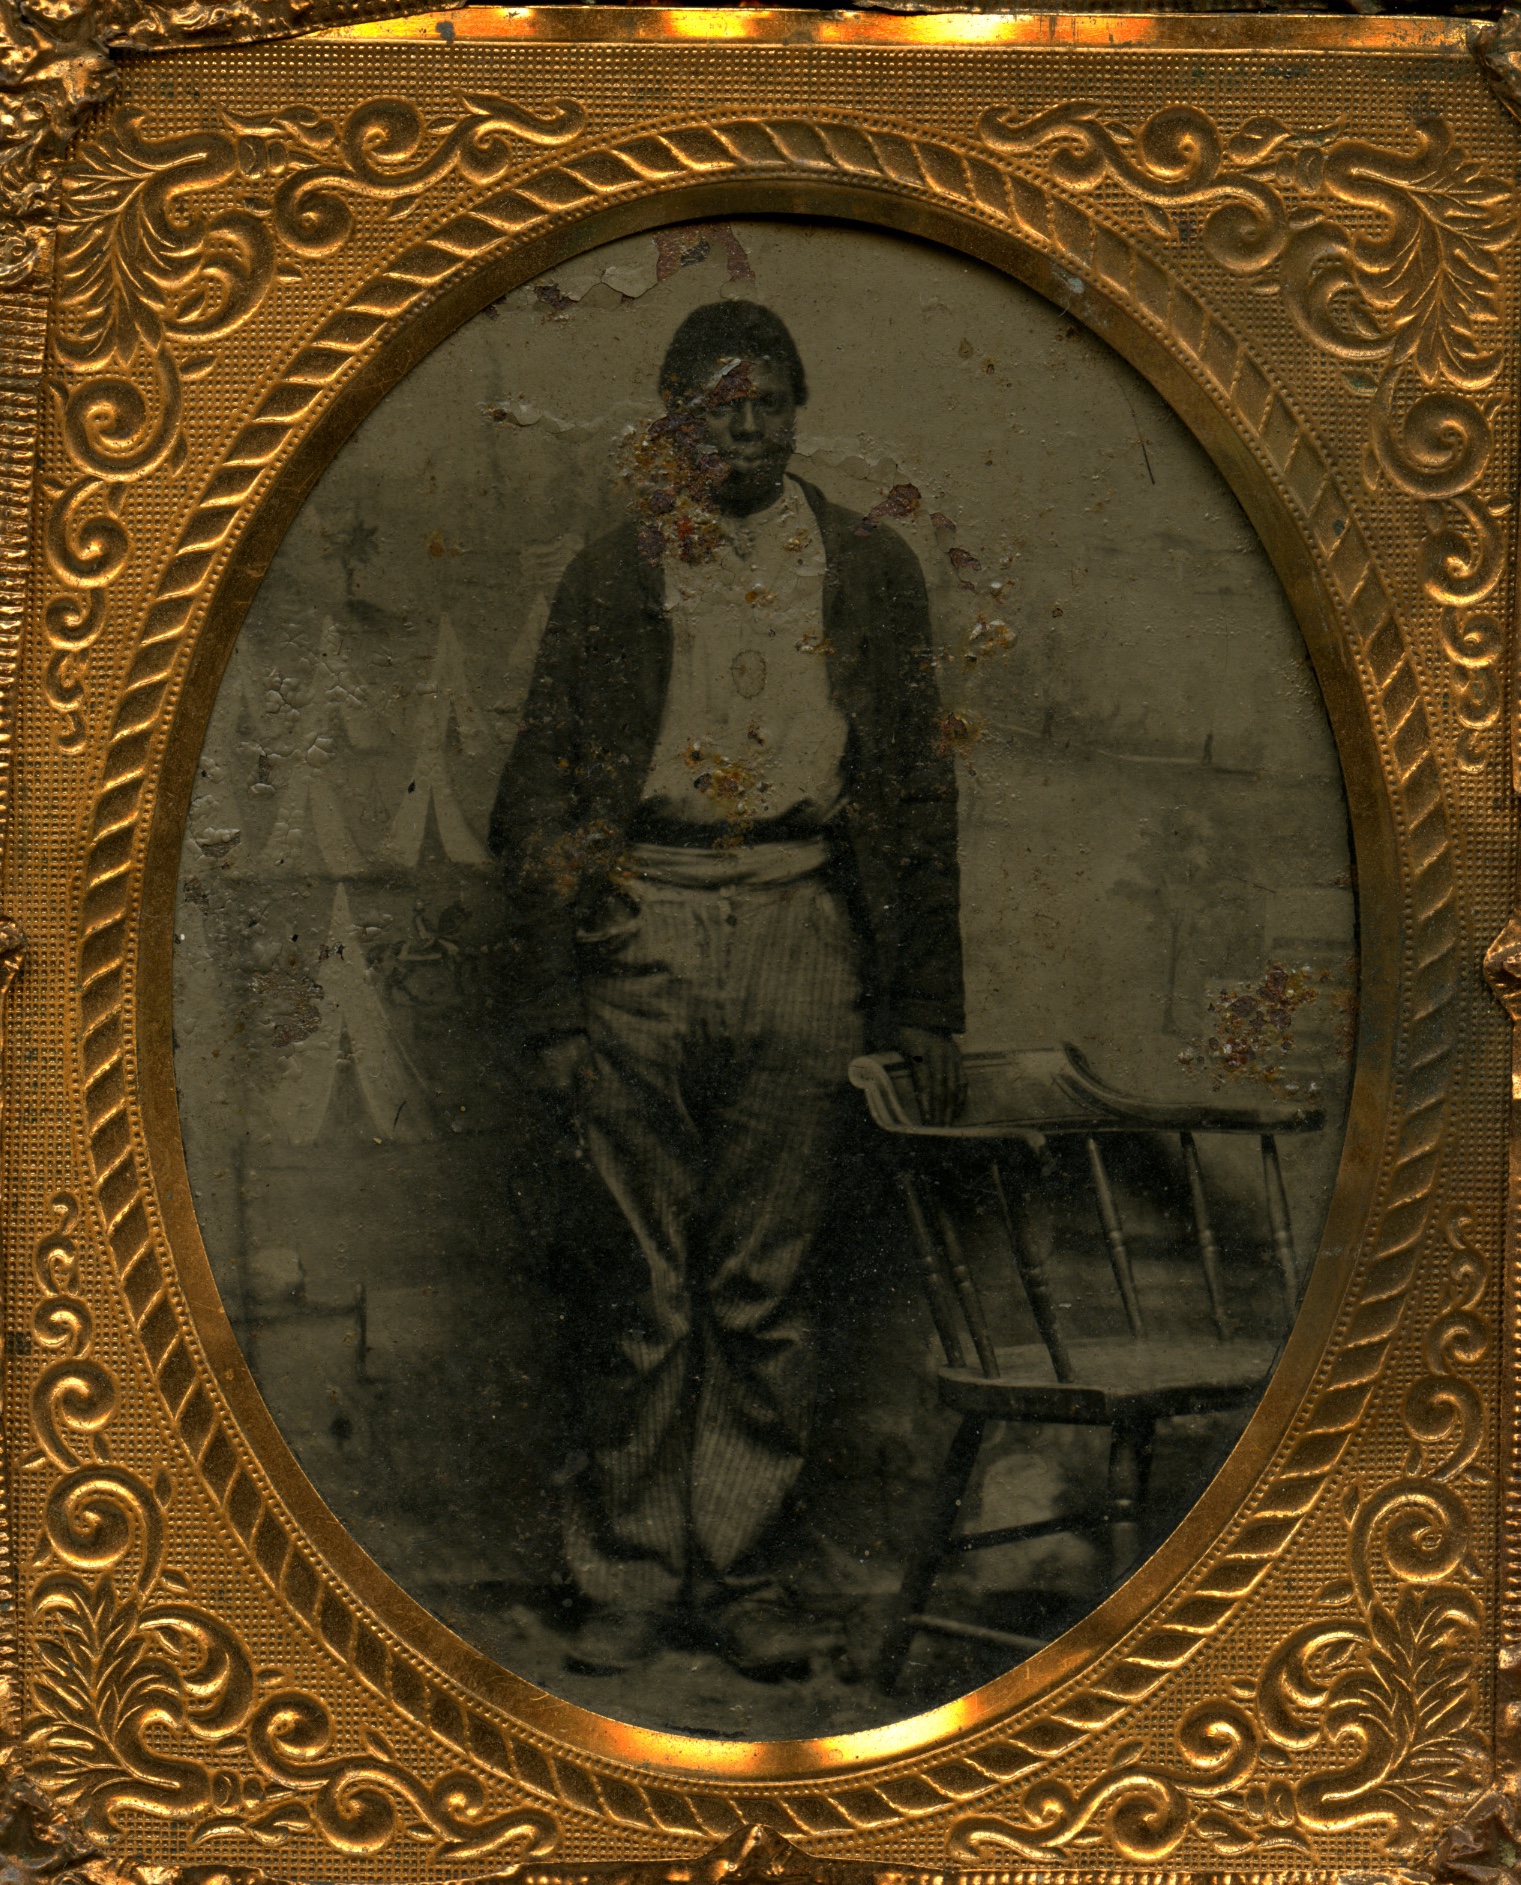 Frederick Douglass Photograph in a Aged Gold Frame